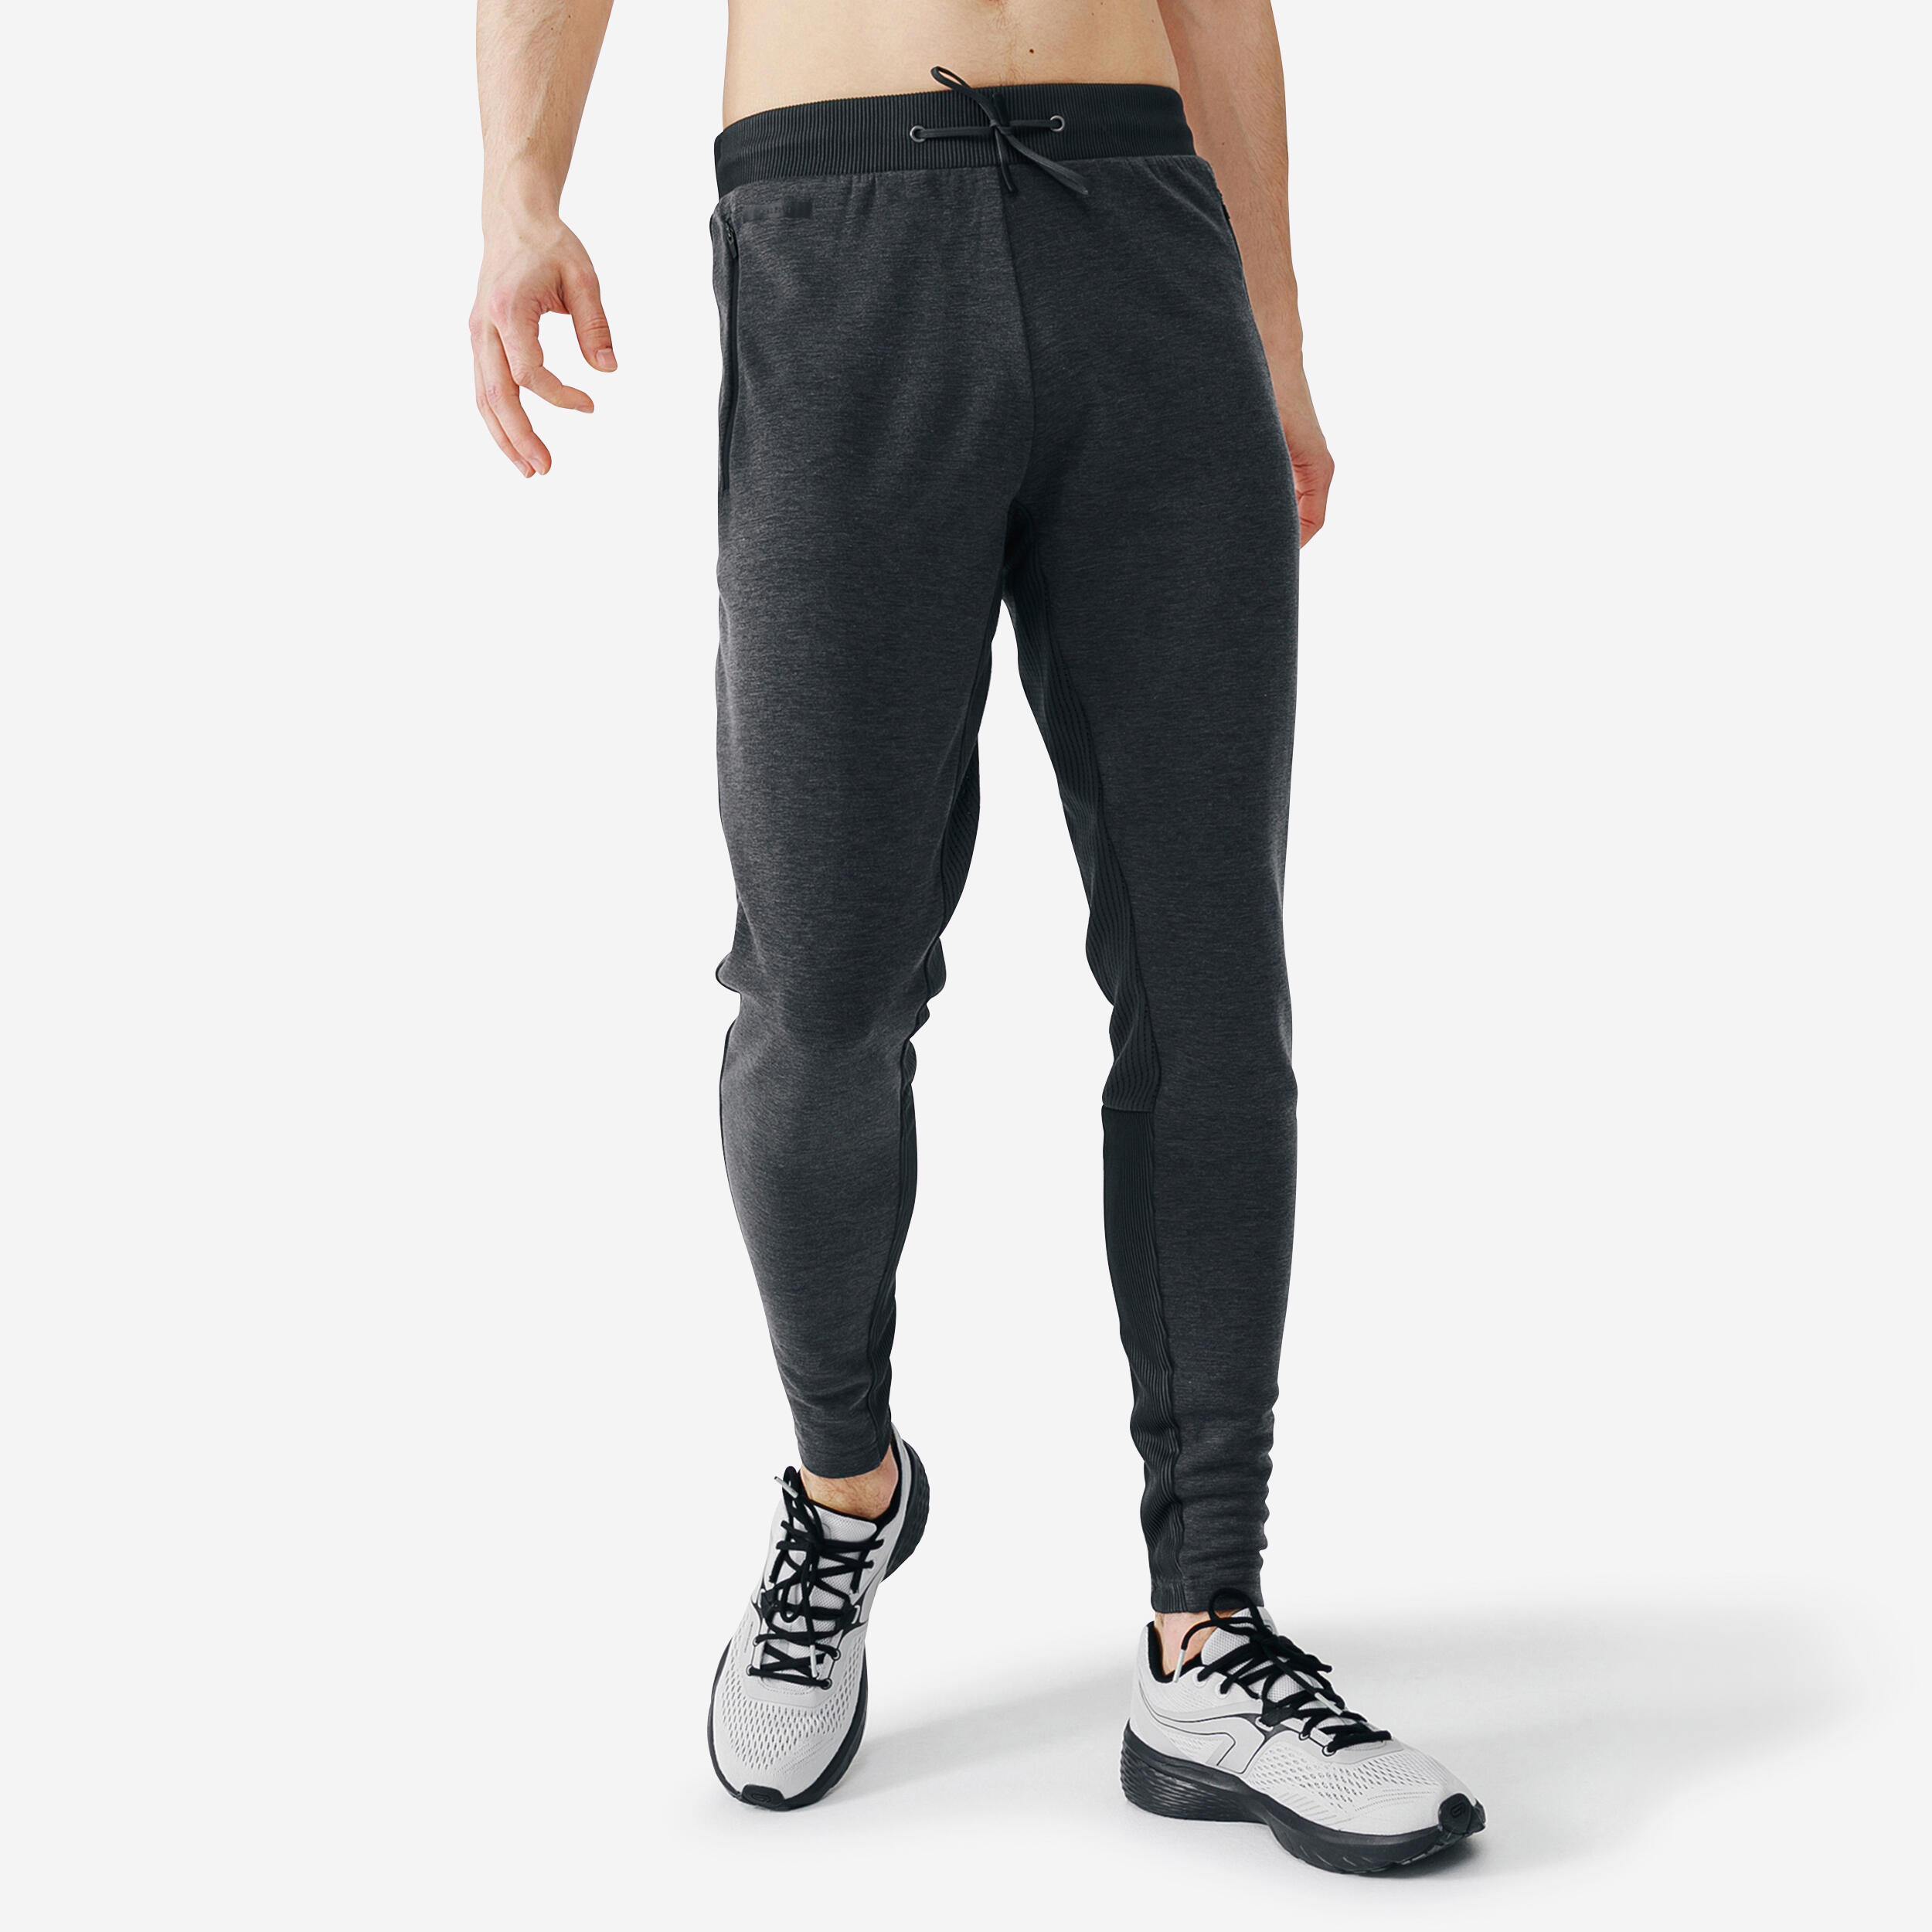 Nike Challenger Men's Dri-FIT Woven Running Trousers. Nike NO